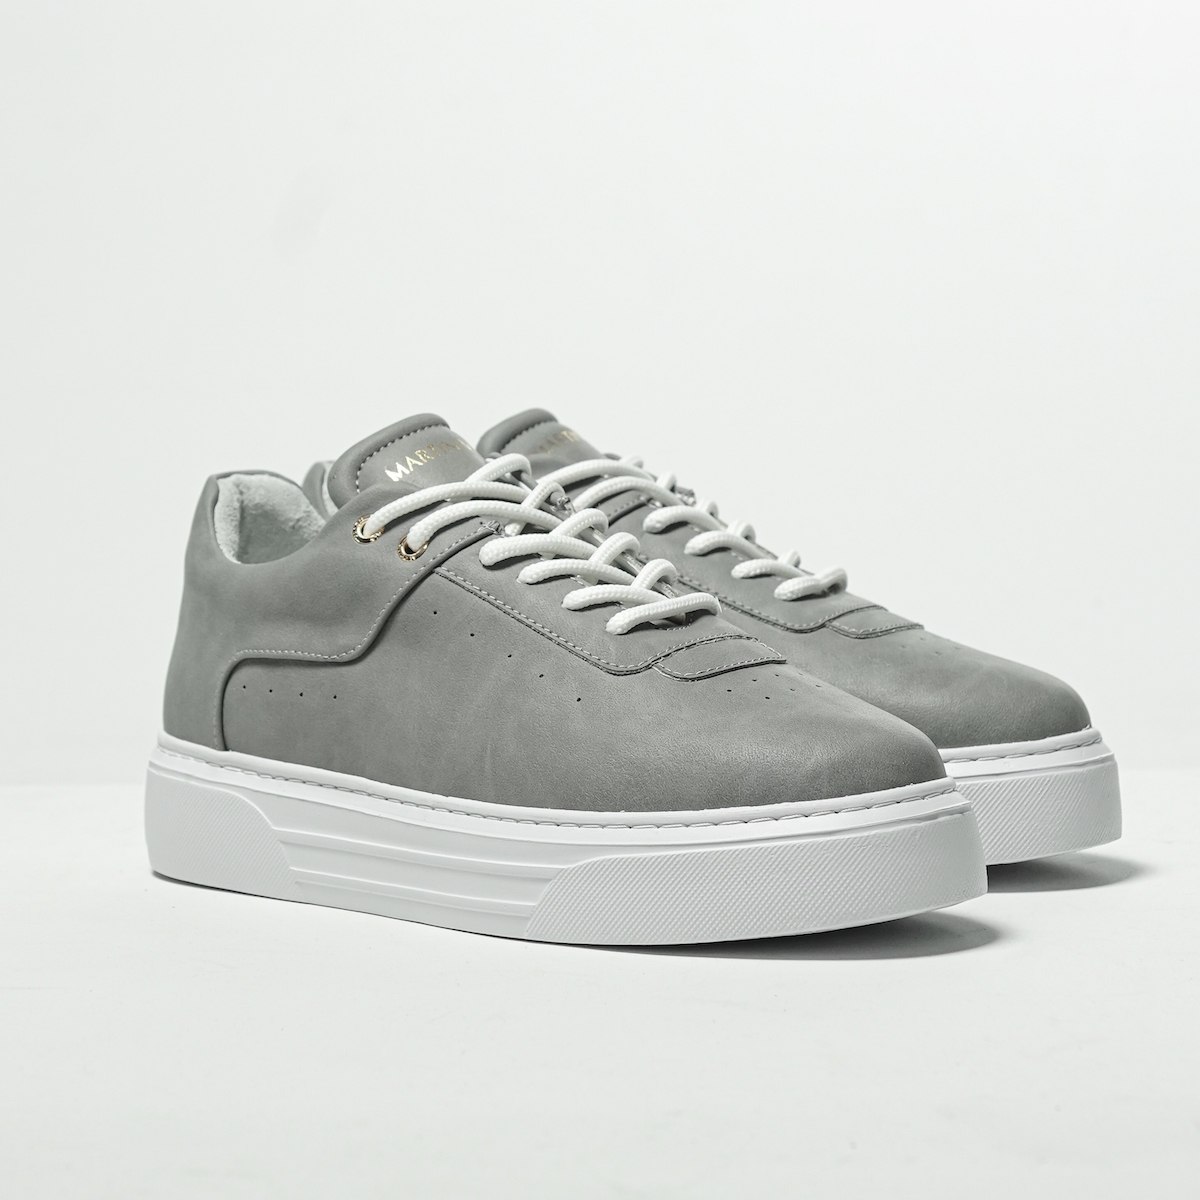 Men’s Casual Sneakers Breathable Shoes Gray | Martin Valen